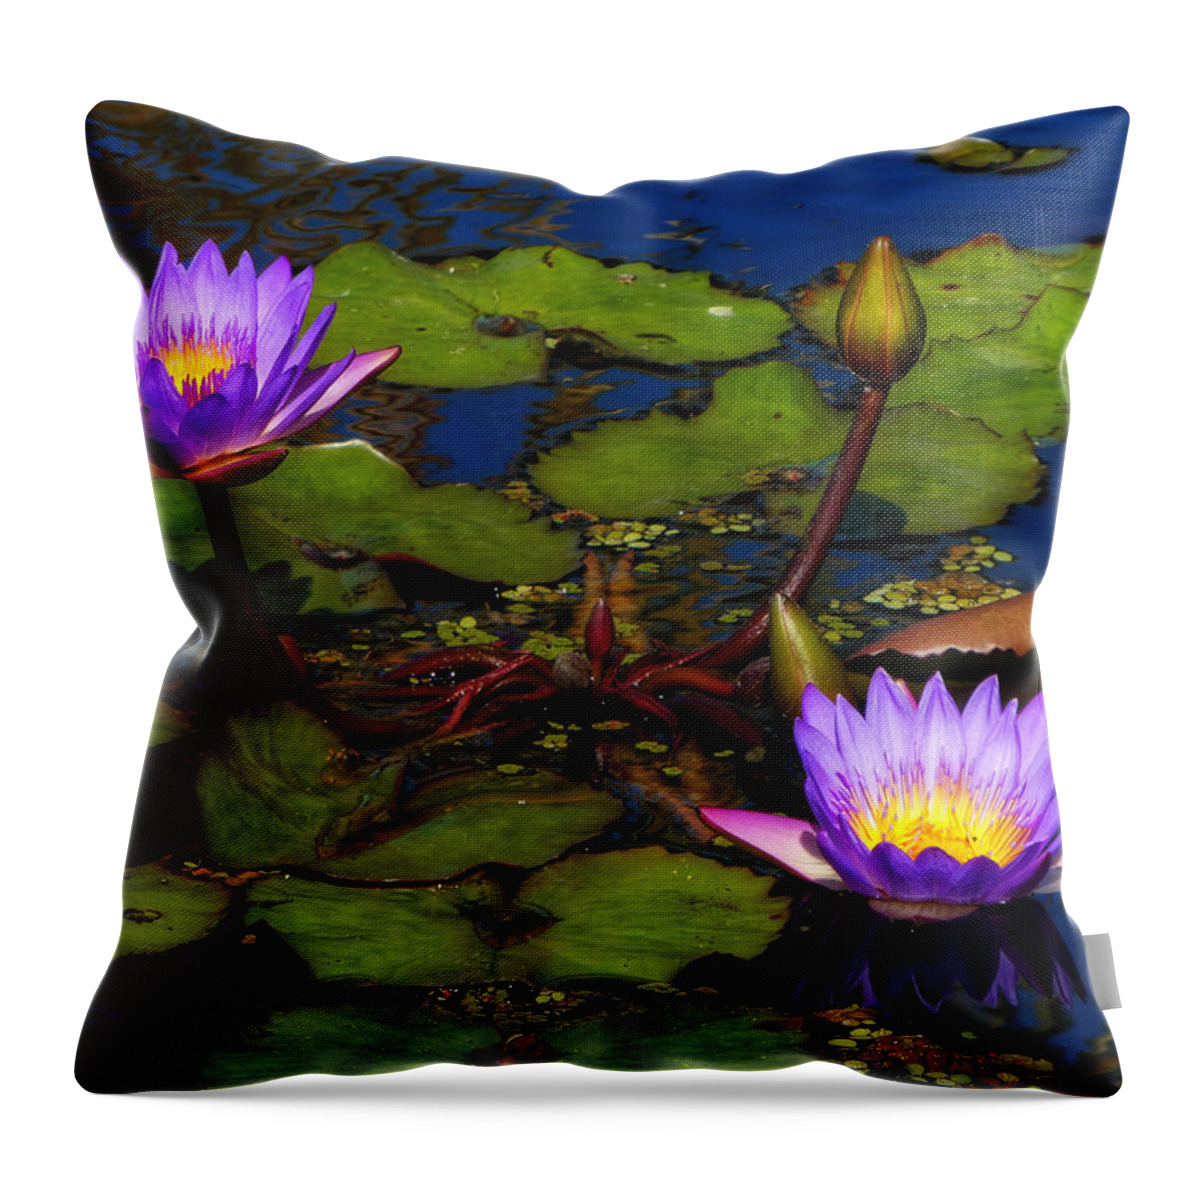 Alligators Throw Pillow featuring the photograph Water Lilies IV by Kathi Isserman